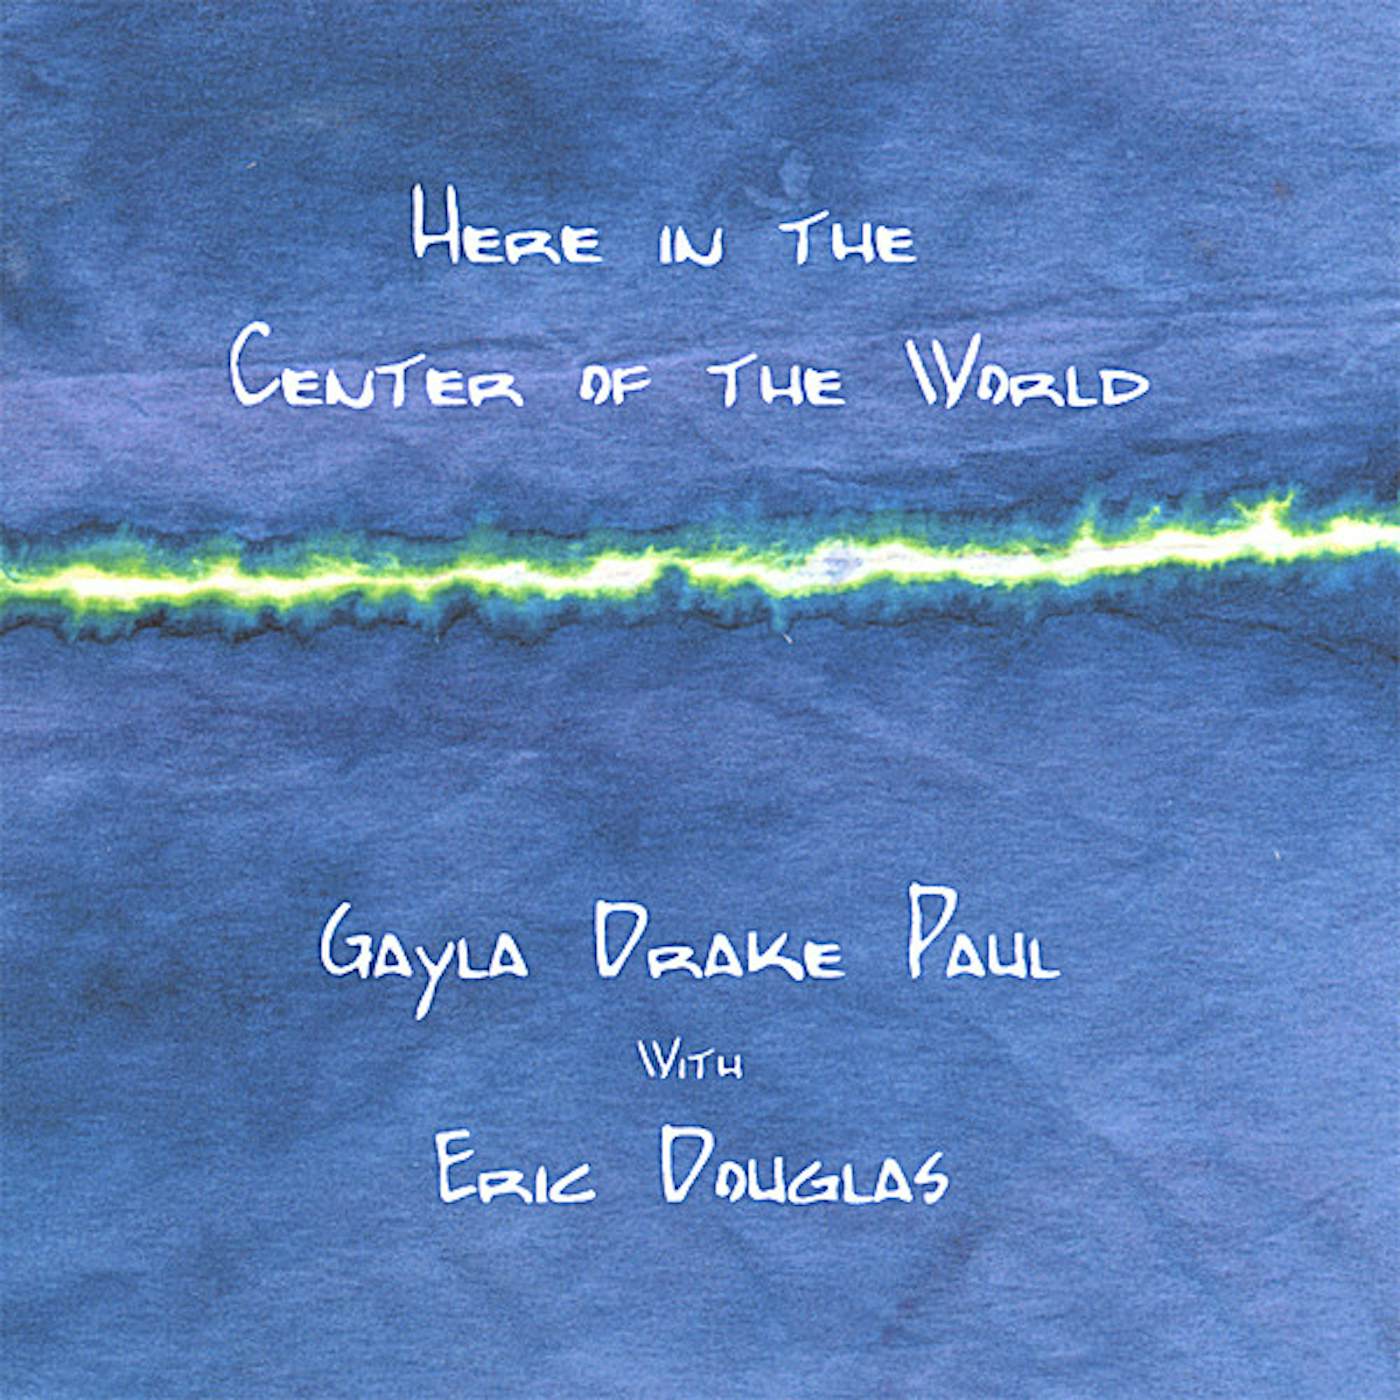 Gayla Drake Paul HERE IN THE CENTER OF THE WORLD CD